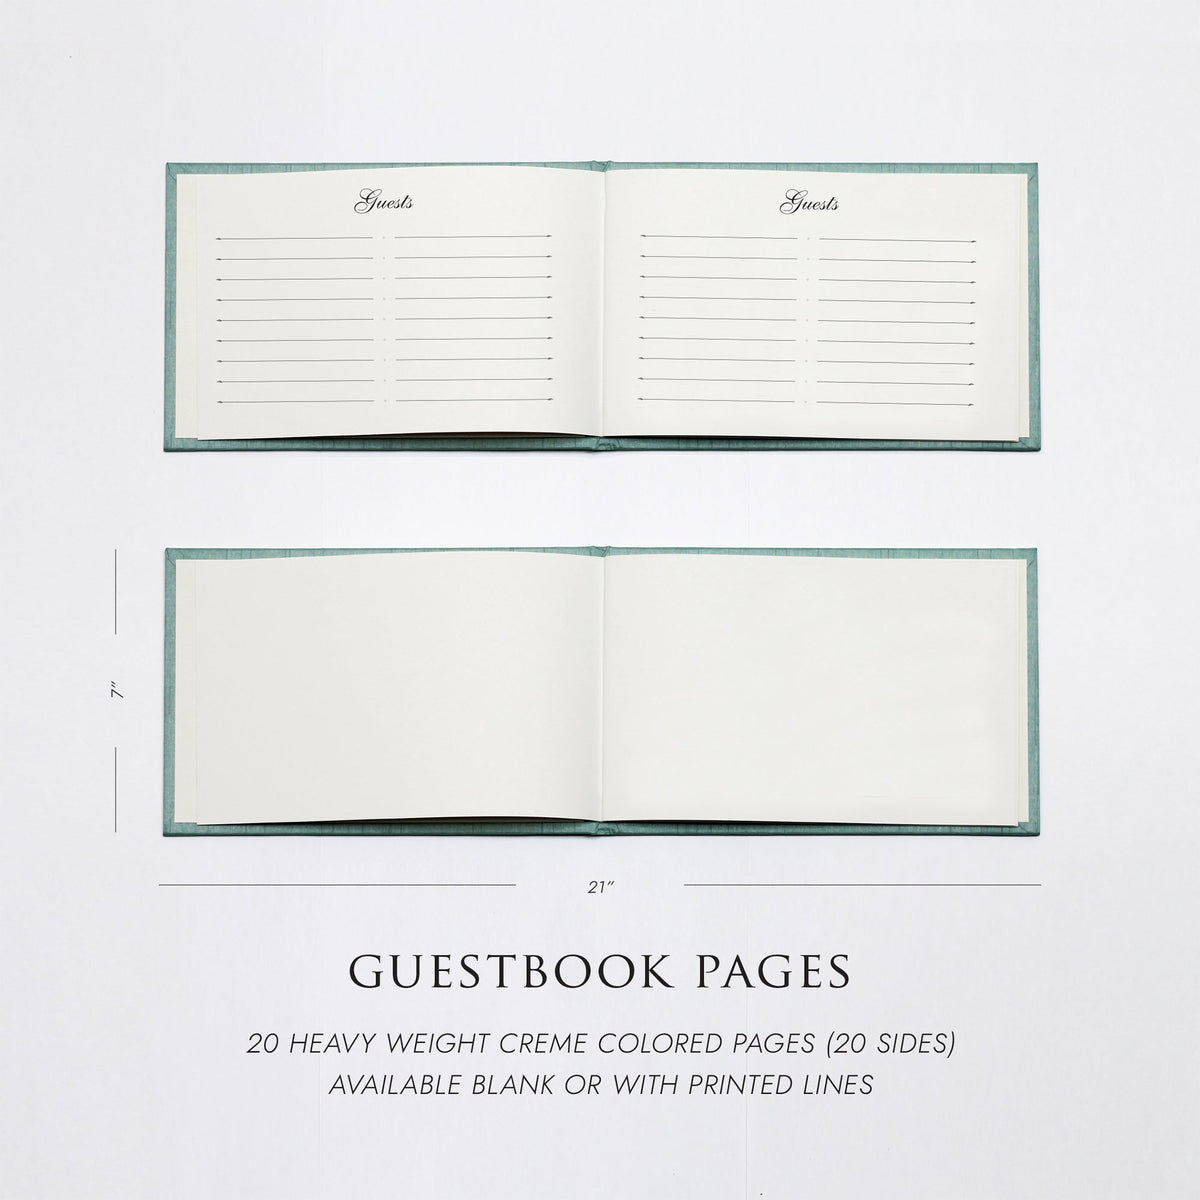 Guestbook Embossed with “Guests” | Cover: Mango Cotton | Available Personalized